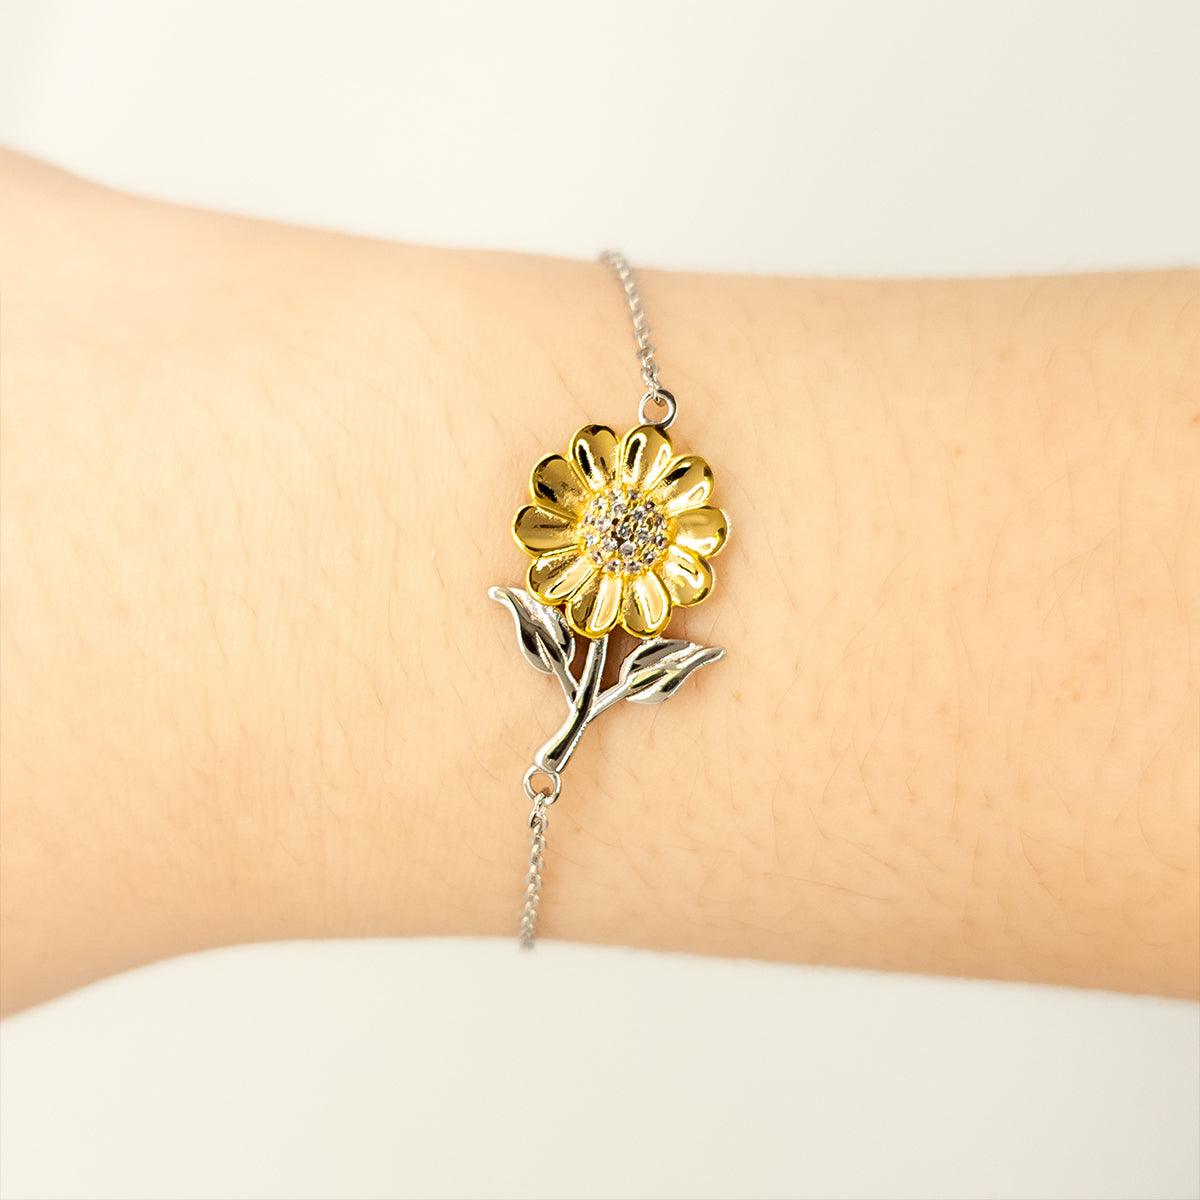 Sarcastic Auditor Sunflower Bracelet Gifts, Christmas Holiday Gifts for Auditor Birthday Message Card, Auditor: Because greatness is woven into the fabric of every day, Coworkers, Friends - Mallard Moon Gift Shop